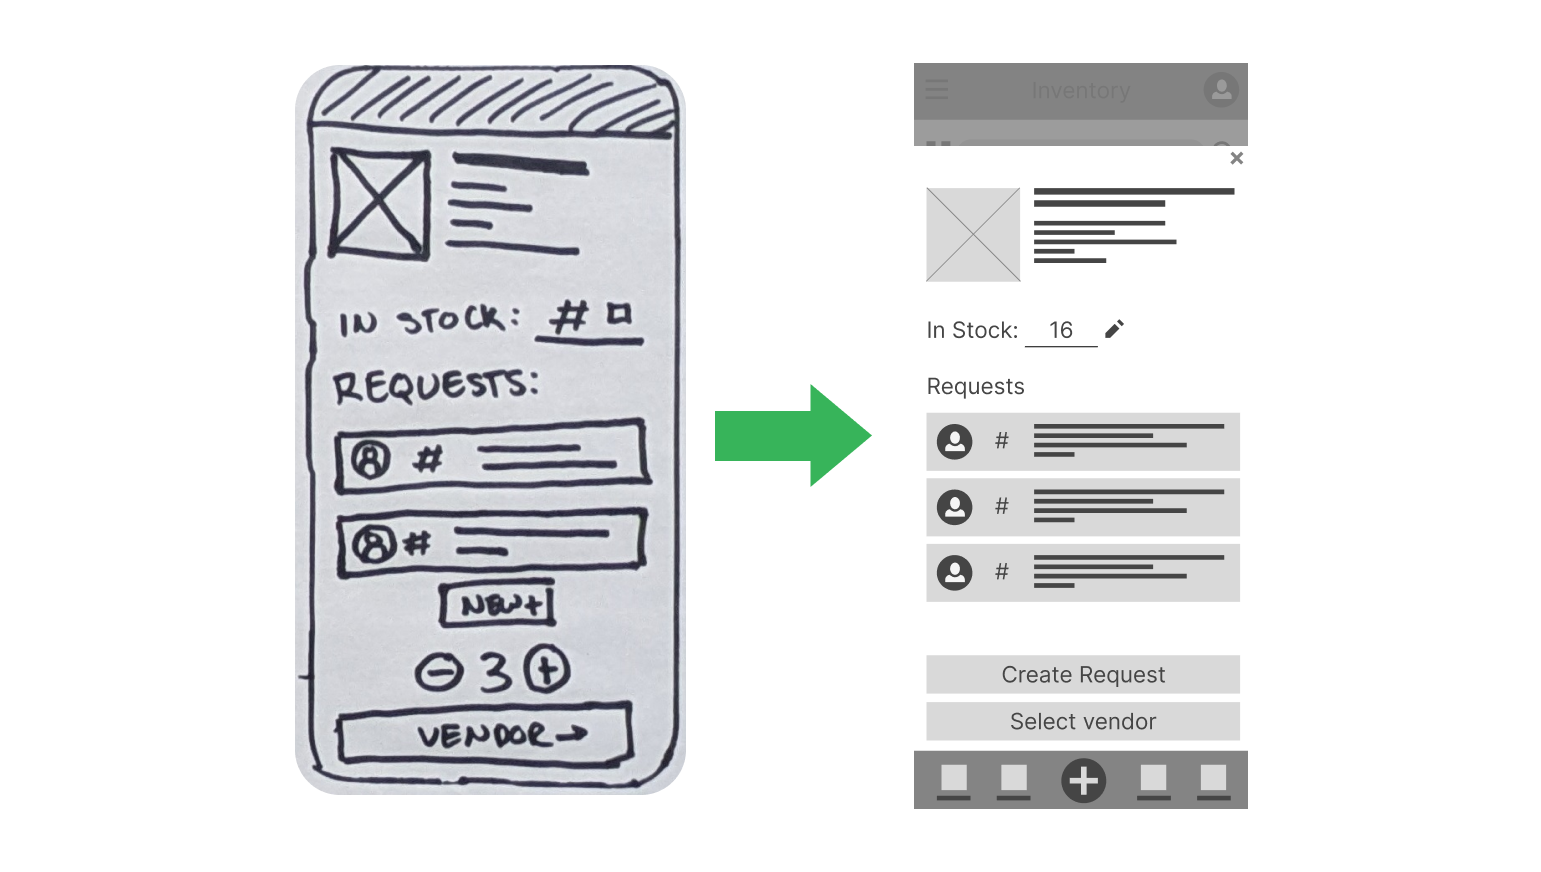 A screen shot showing the transformation of the item page from the original rough sketch on the left to the low fidelity digital wireframe on the right. A green arrow points from left to right, indicating the transformation.